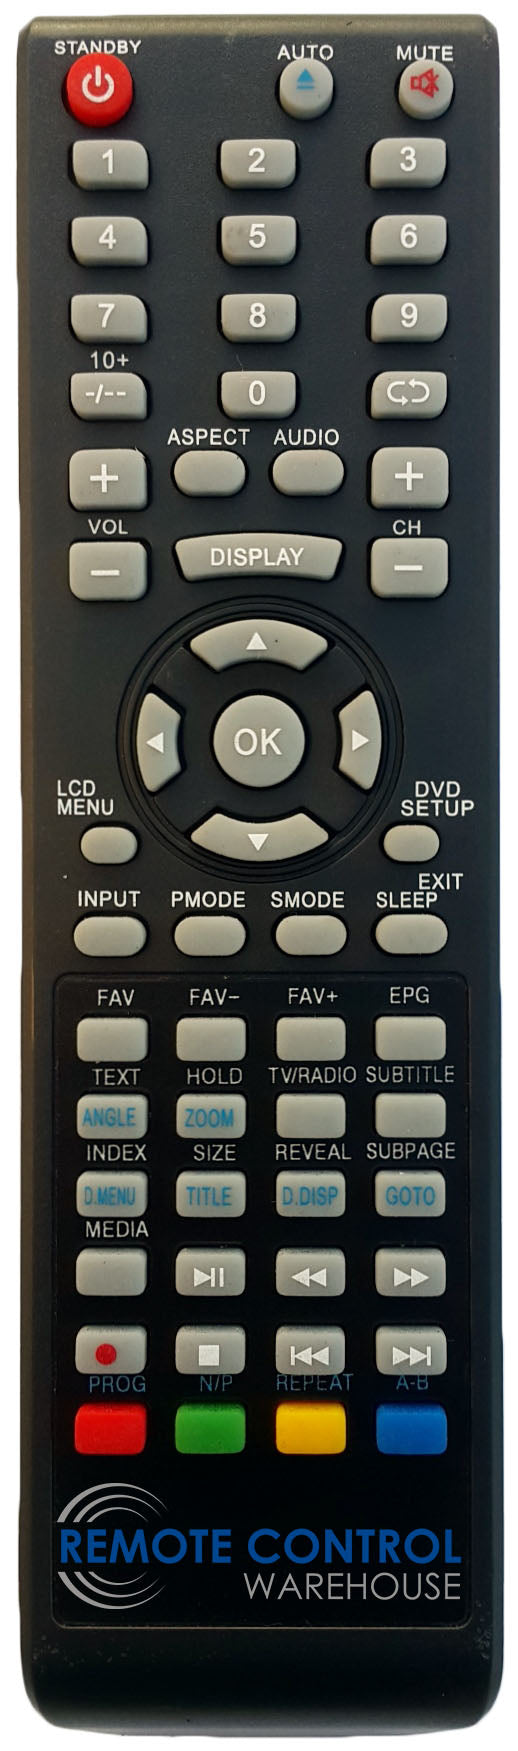 REPLACEMENT SPHERE REMOTE CONTROL FOR SPHERE 185HDLED TV - Remote Control Warehouse